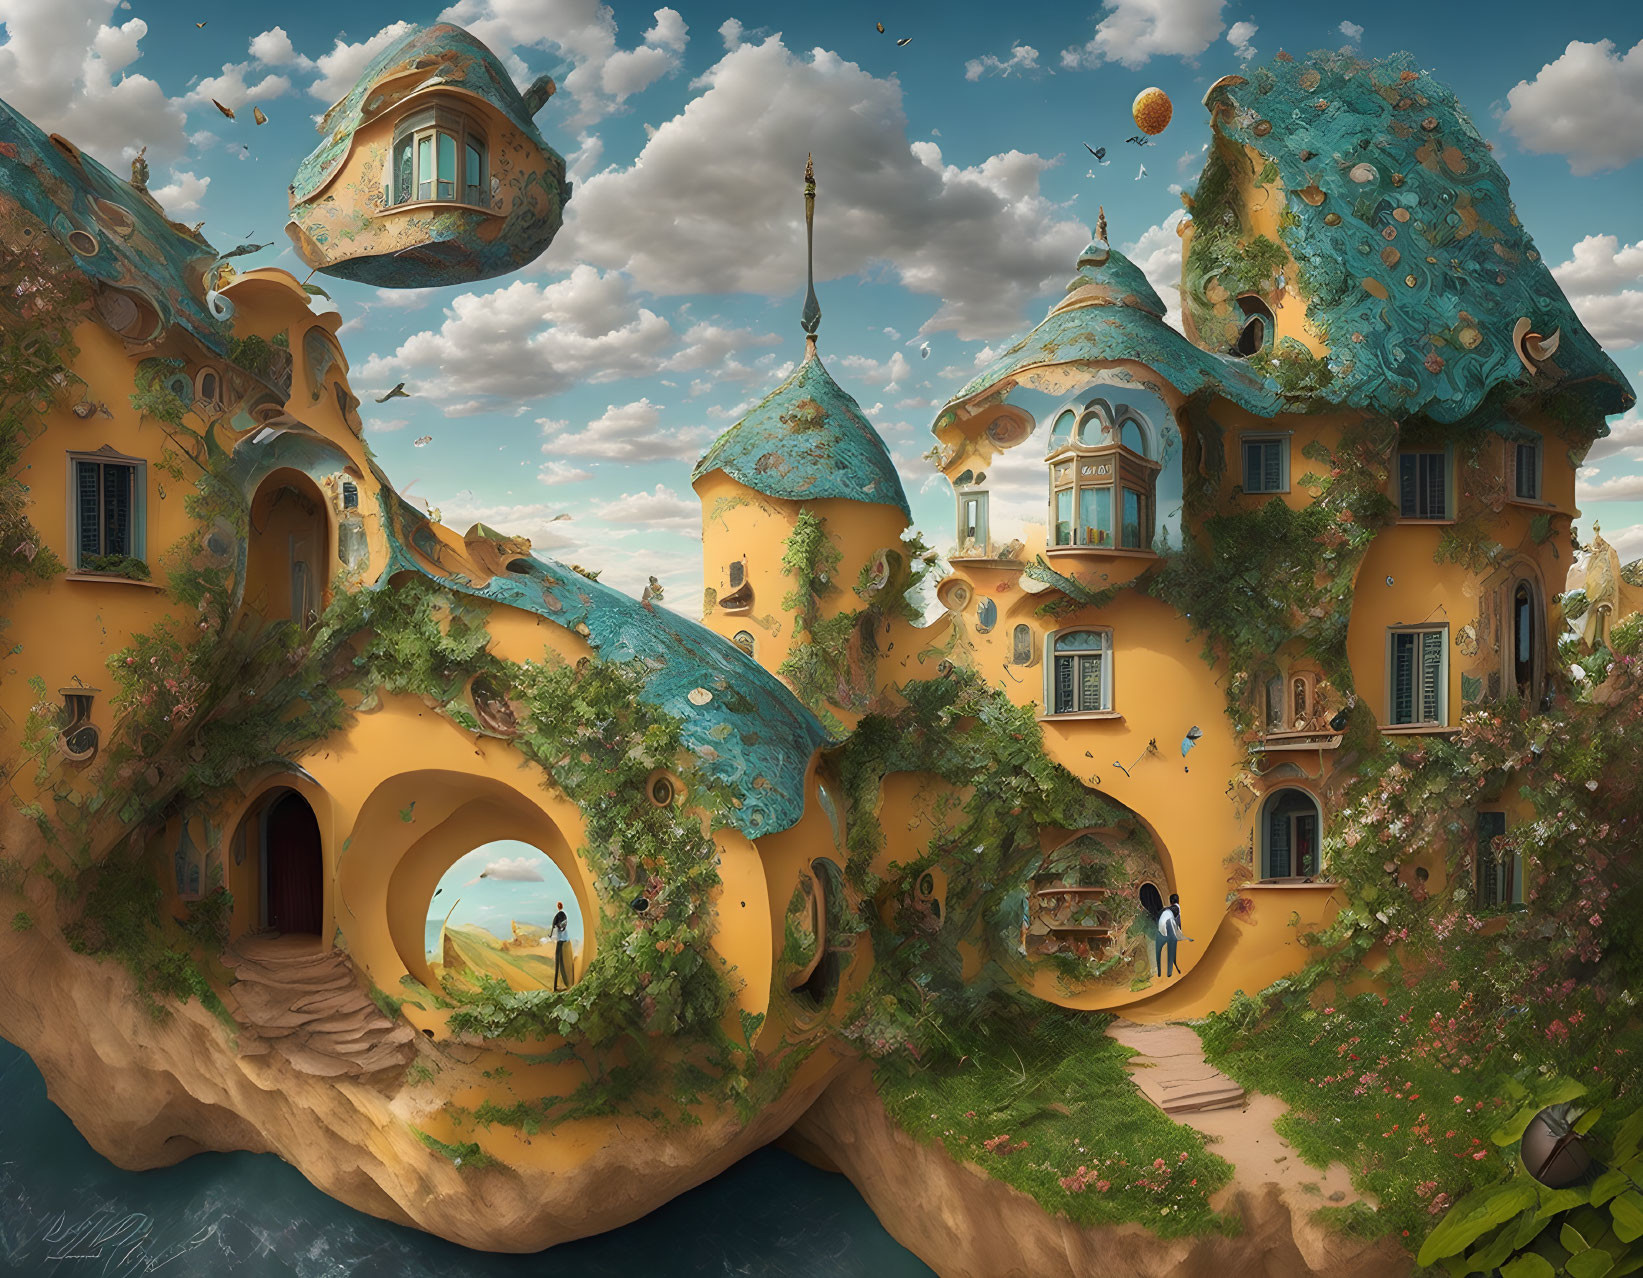 Colorful Landscape with Surreal Architecture and Floating Islands